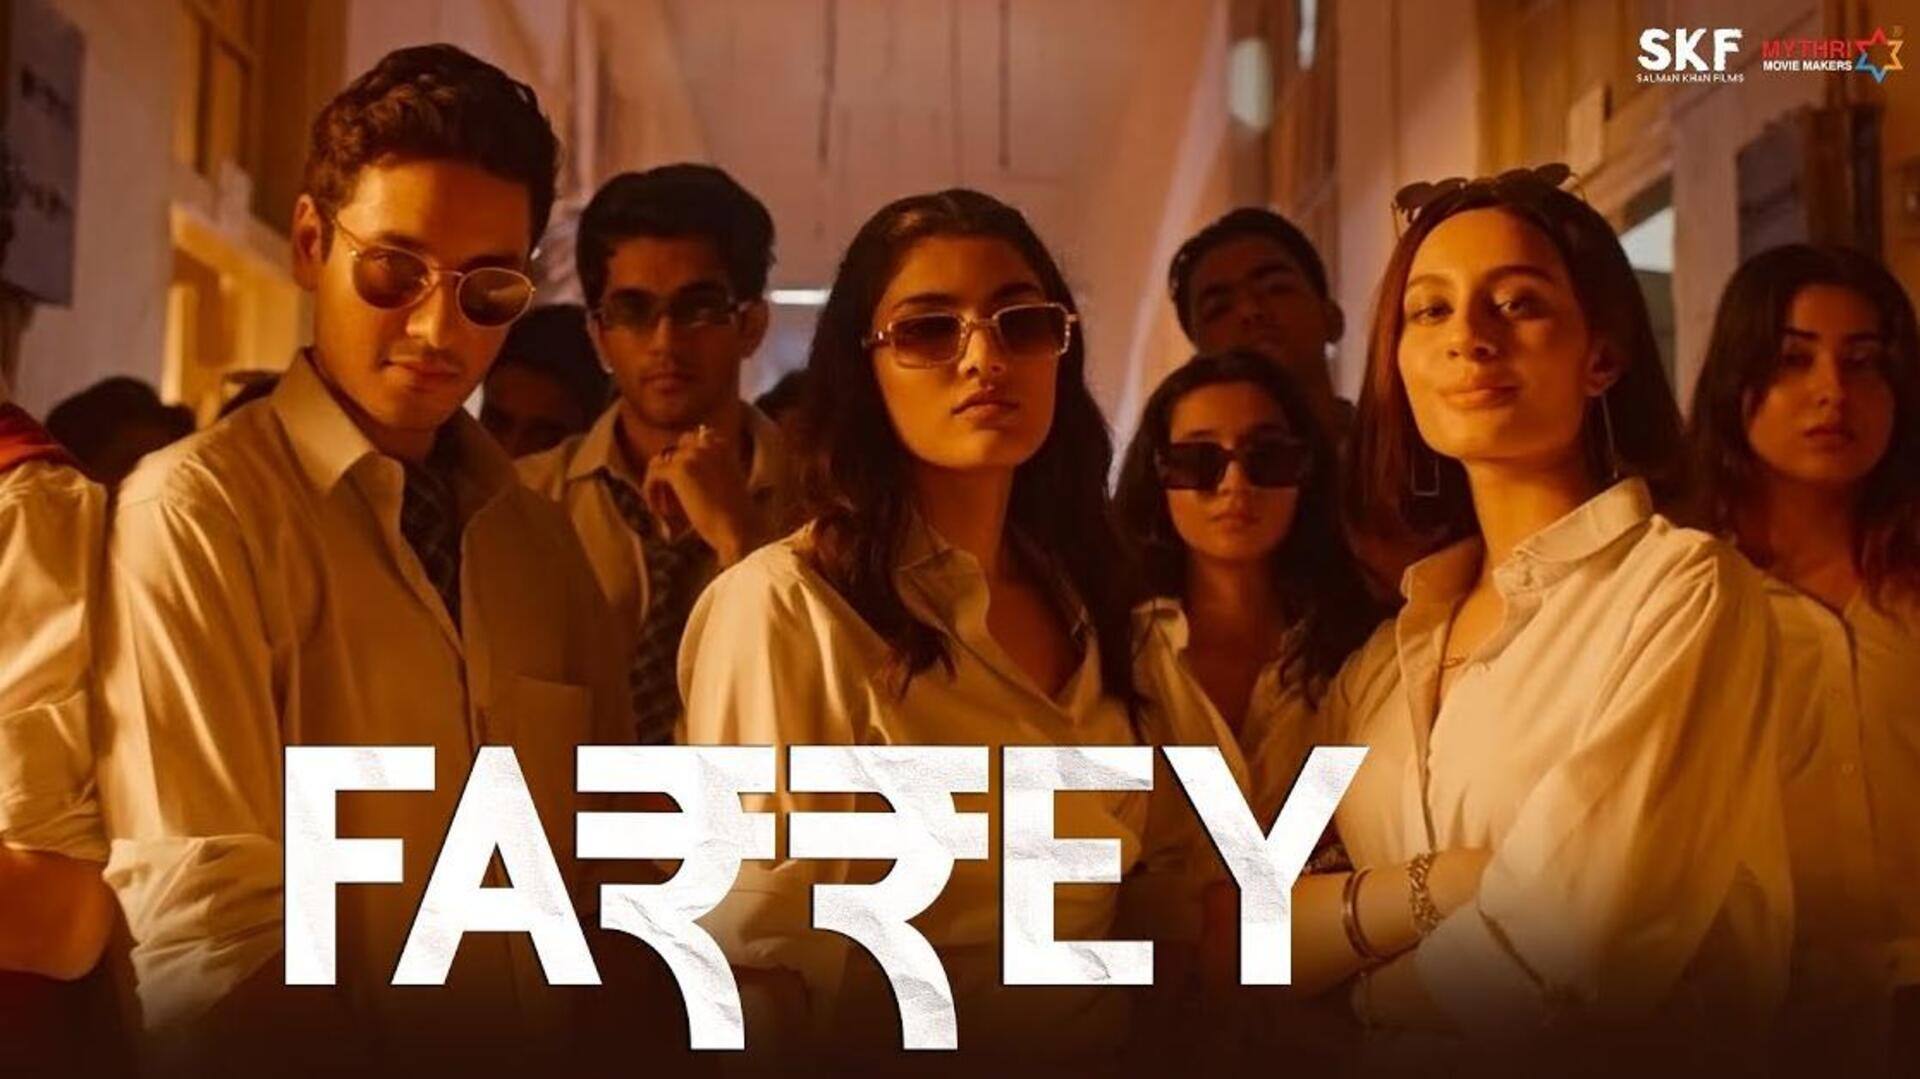 Box office collection: 'Farrey' fails the Monday test